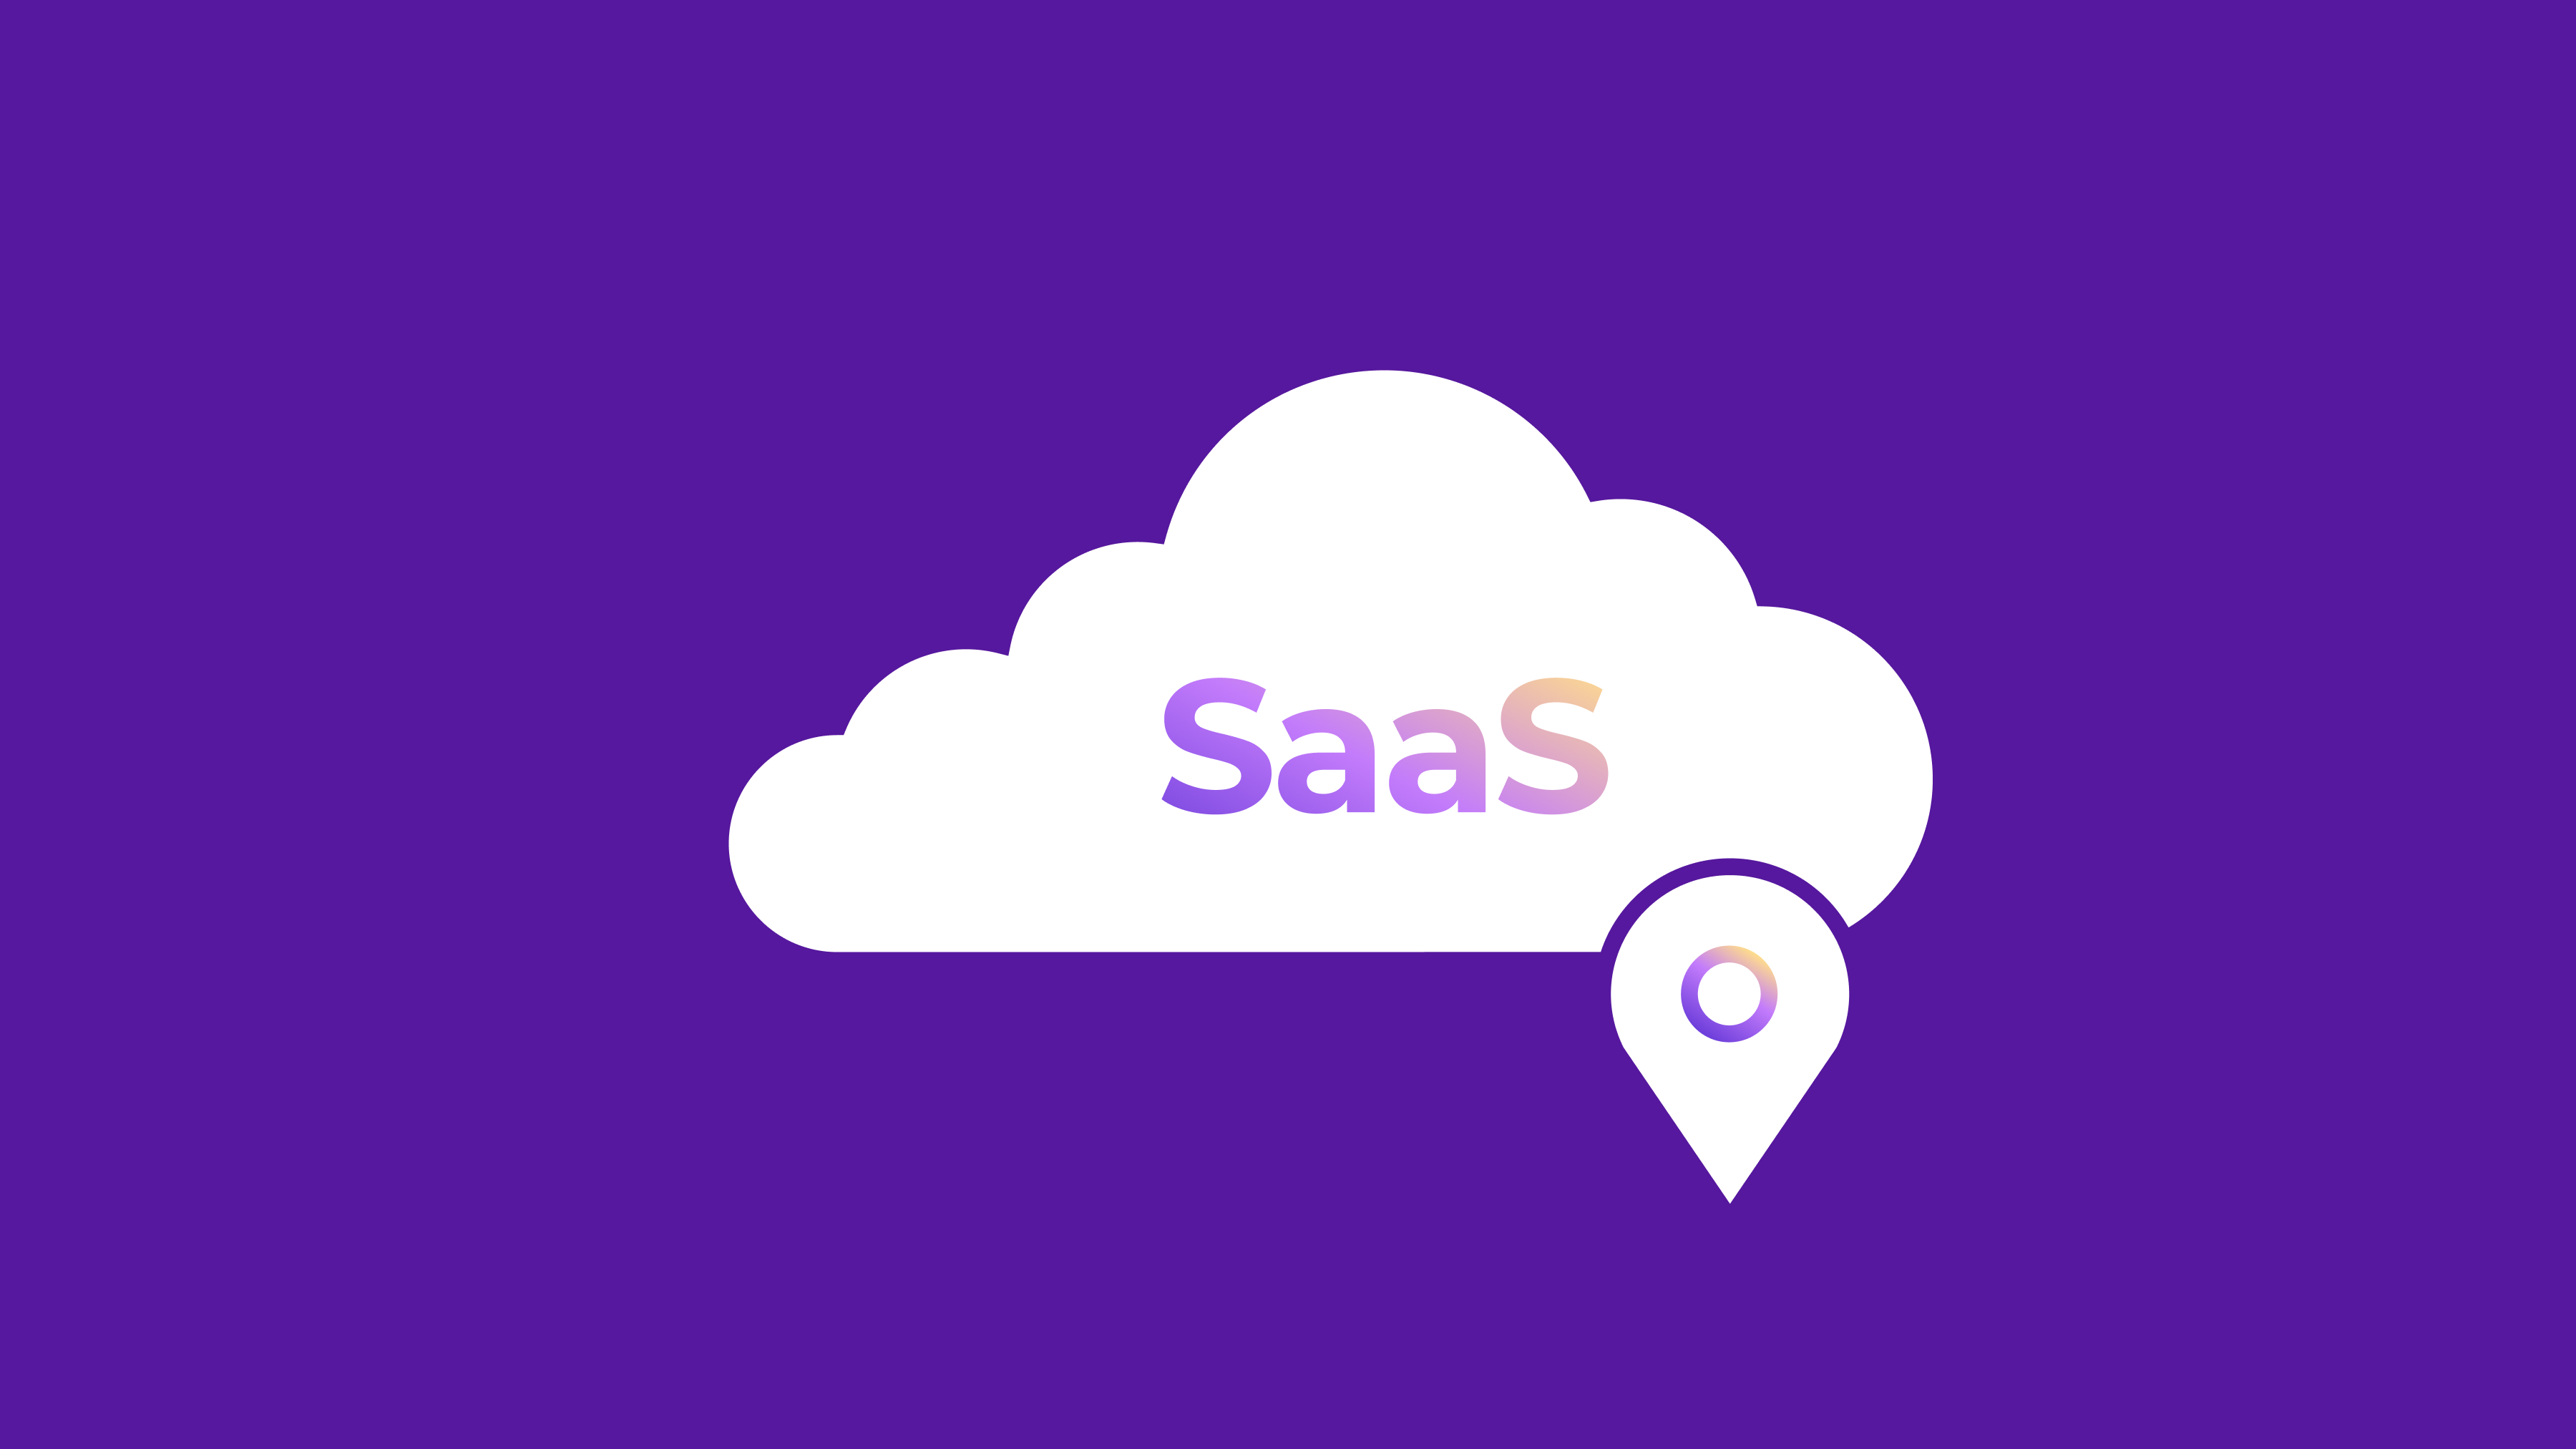 Dive into our detailed guide on the SaaS localization process with six powerful tactics to include in your own global marketing or expansion strategy.